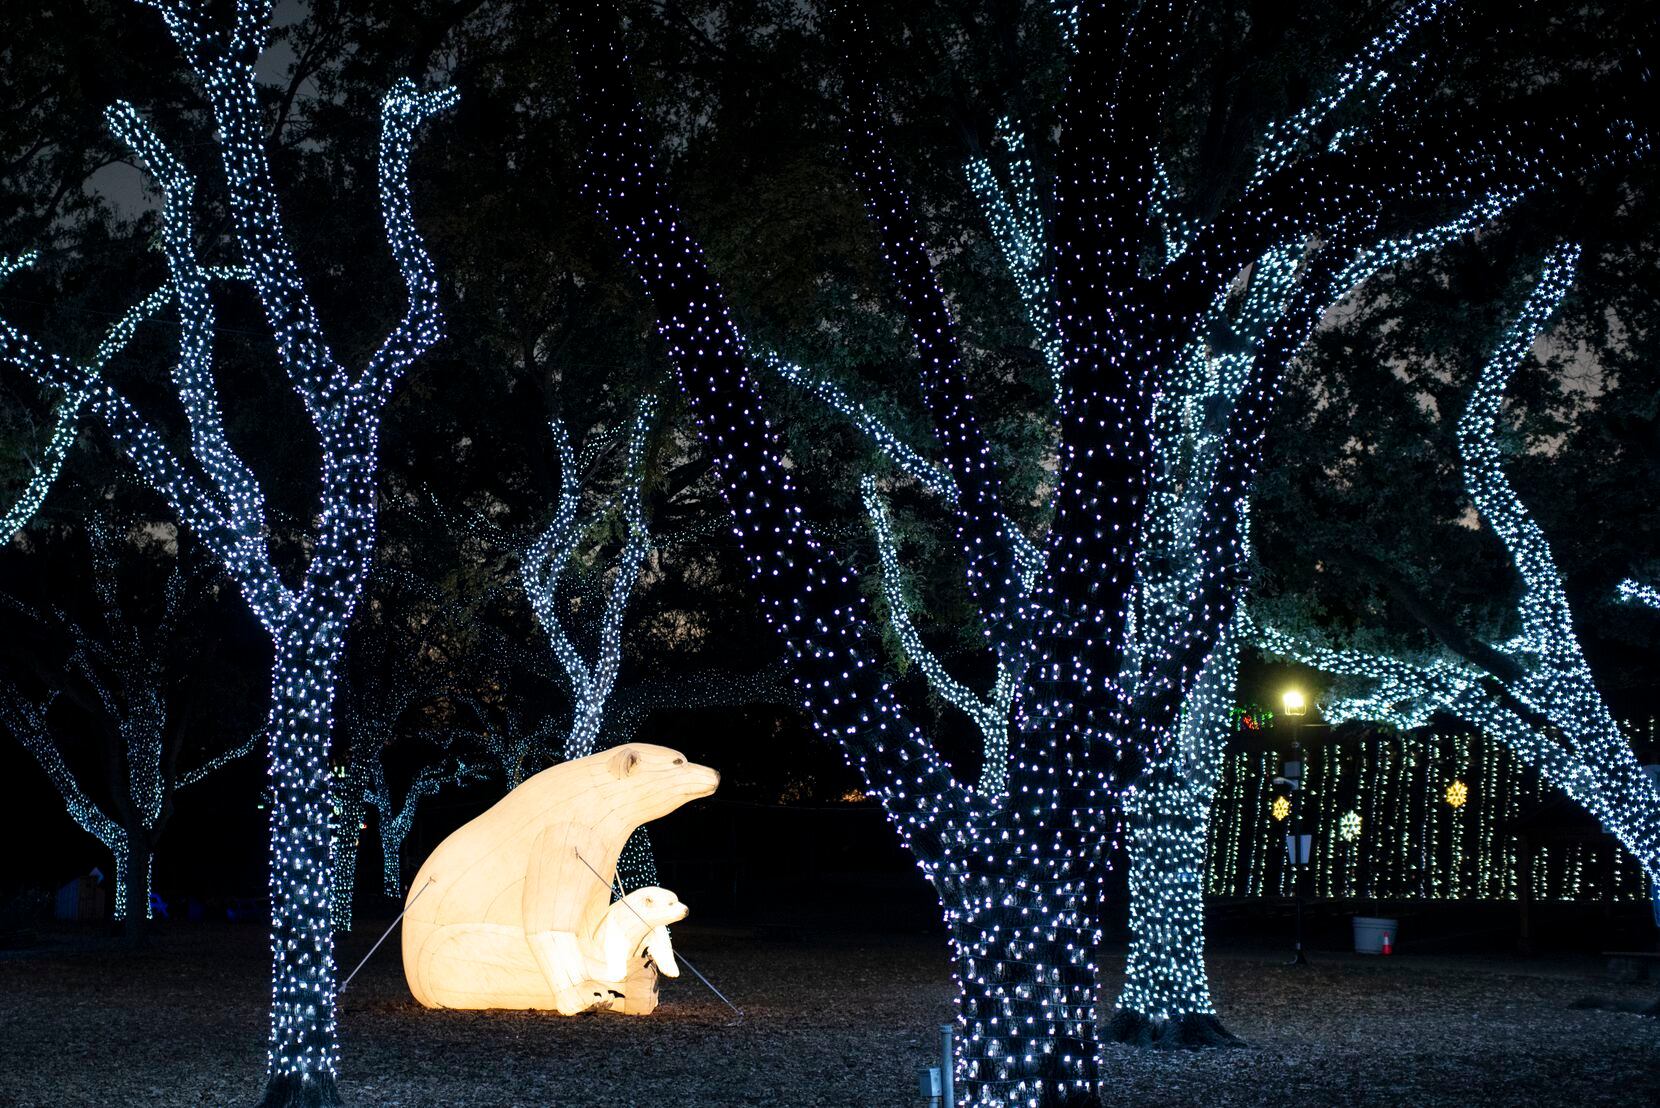 The Dallas Zoo's drive-through display has 1 million lights, light sculptures, moving...